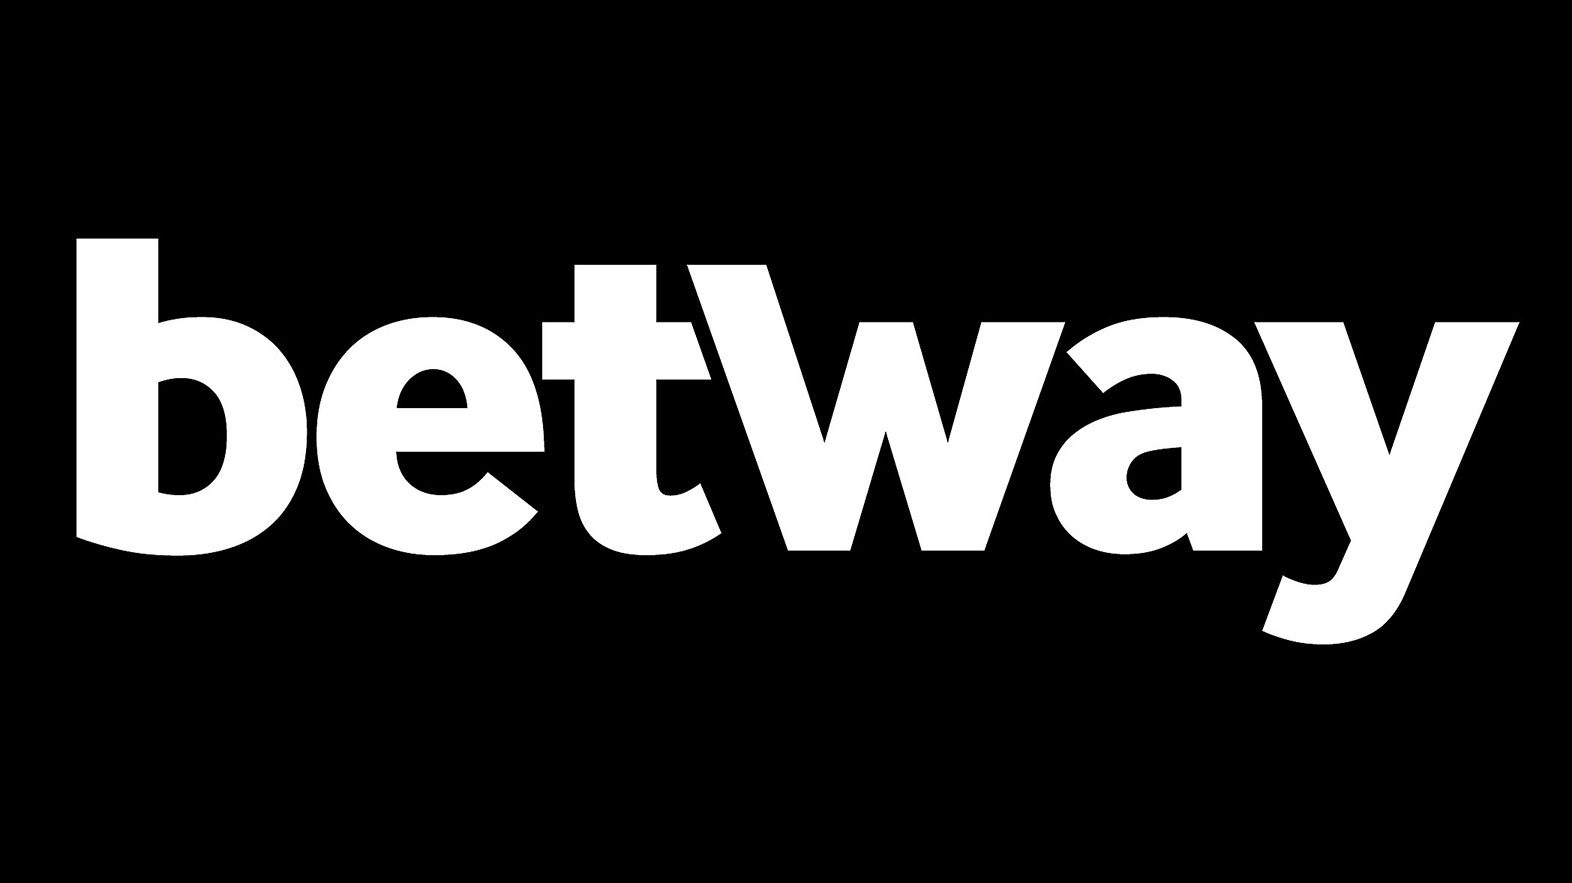 Step by Step Betway guide for beginners